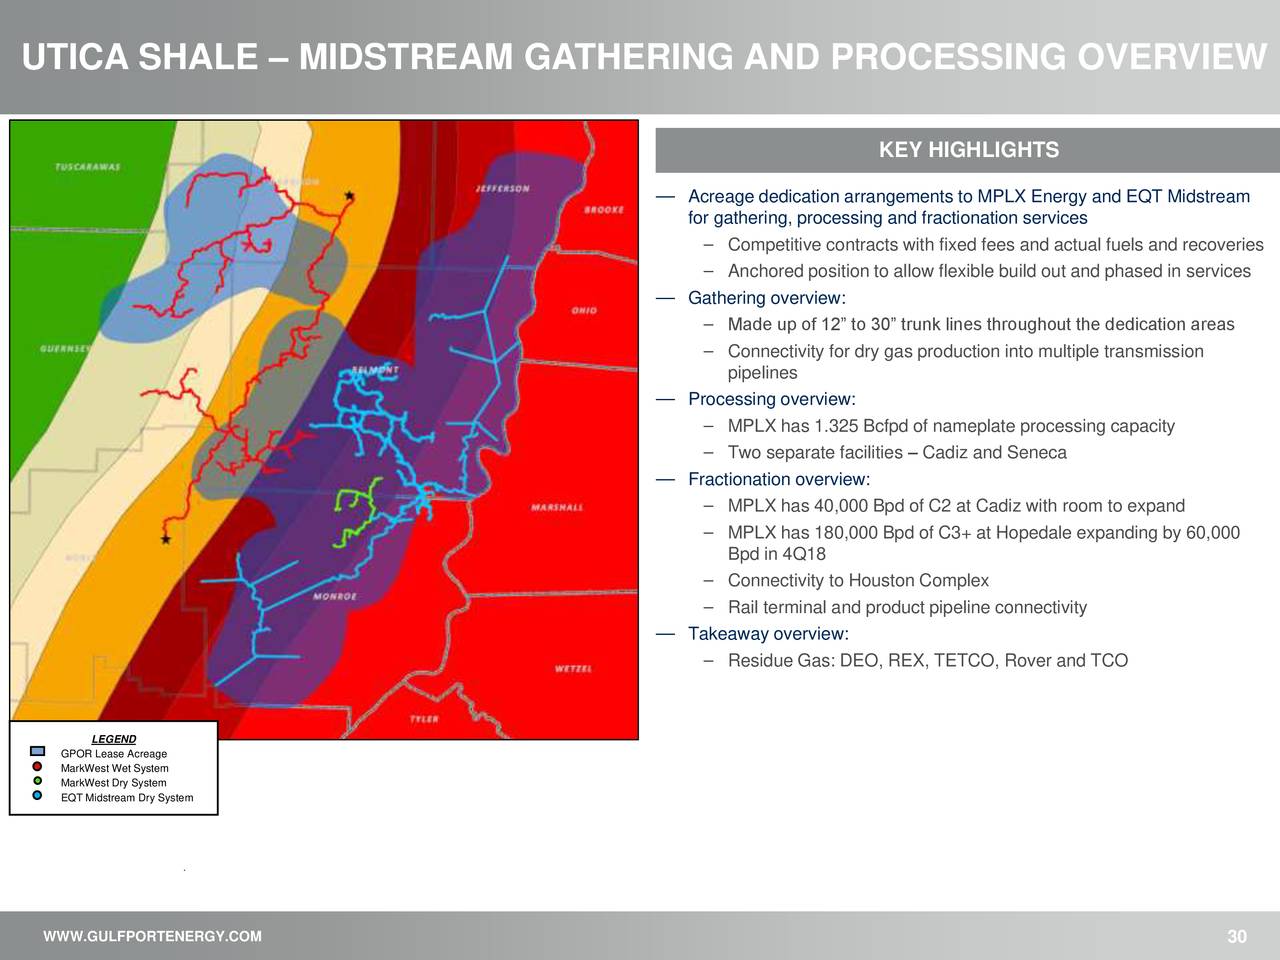 UTICA SHALE – MIDSTREAM GATHERING AND PROCESSING OVERVIEW